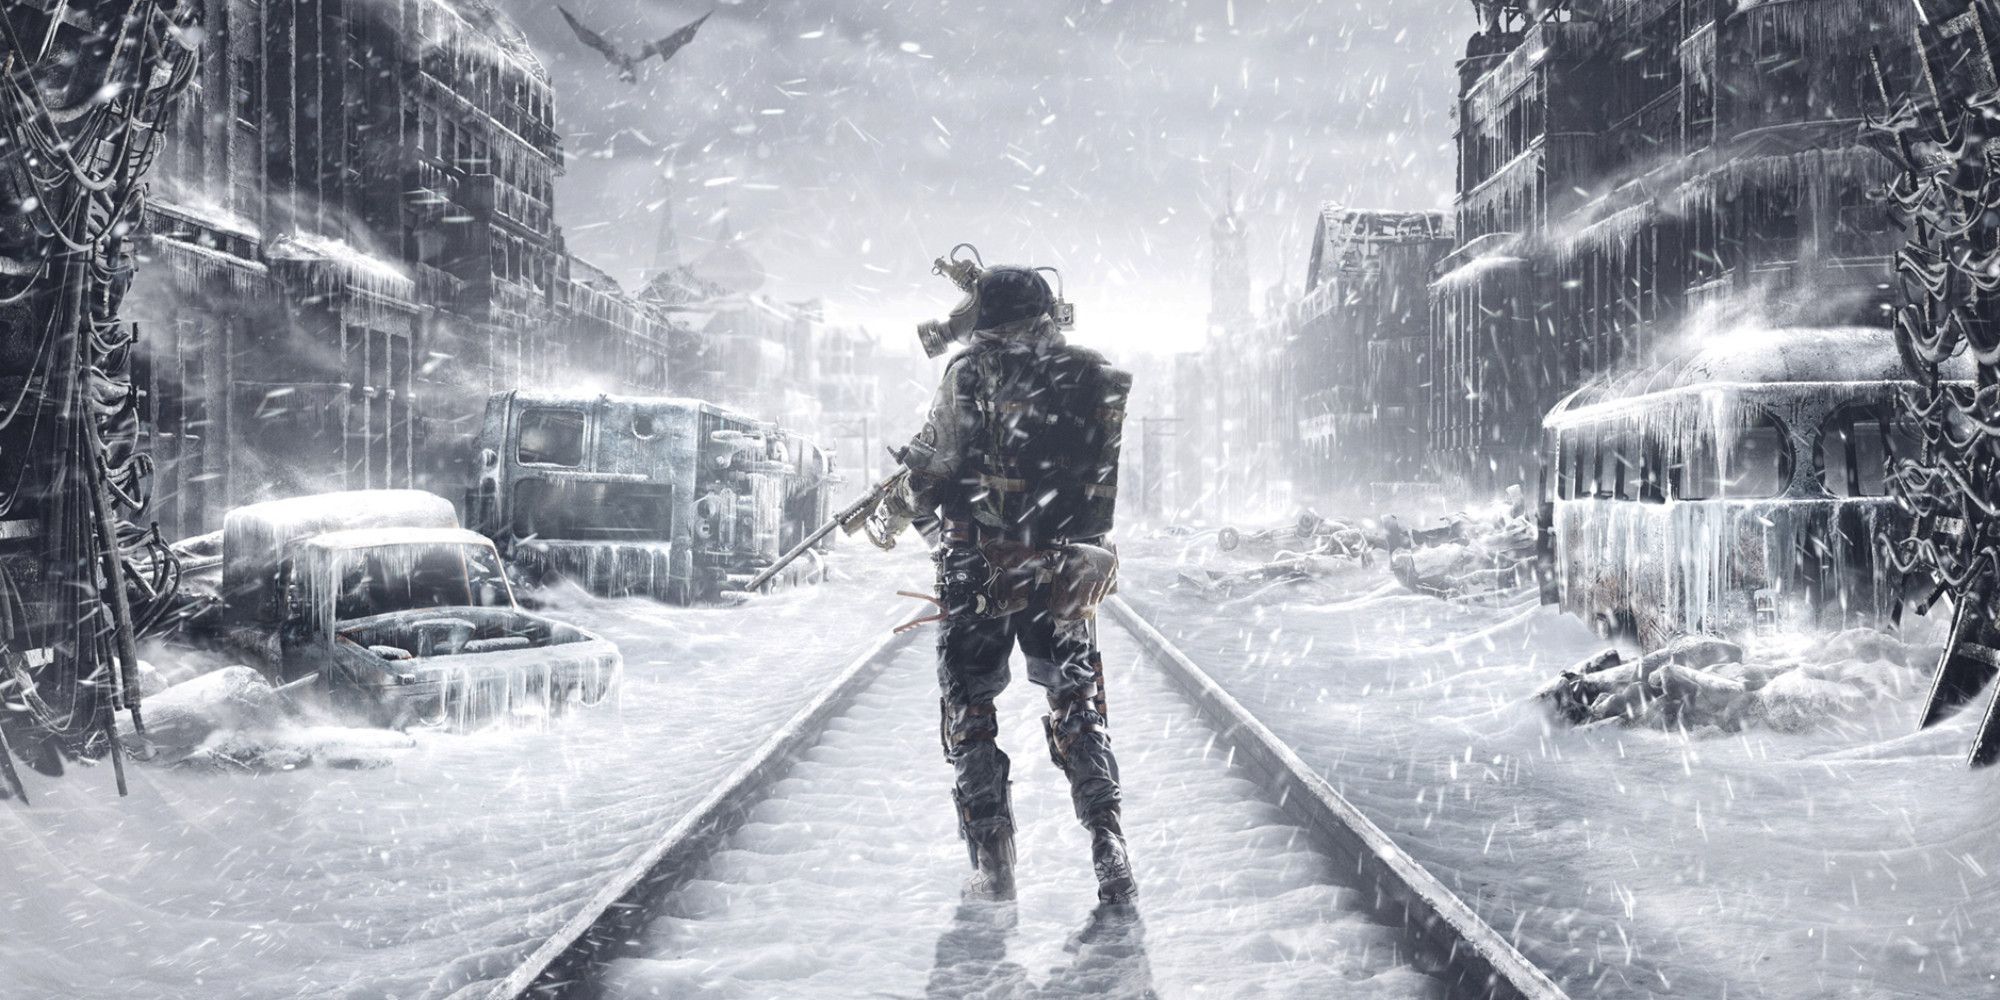 Metro A soldier stands on a railway track in a snowstorm